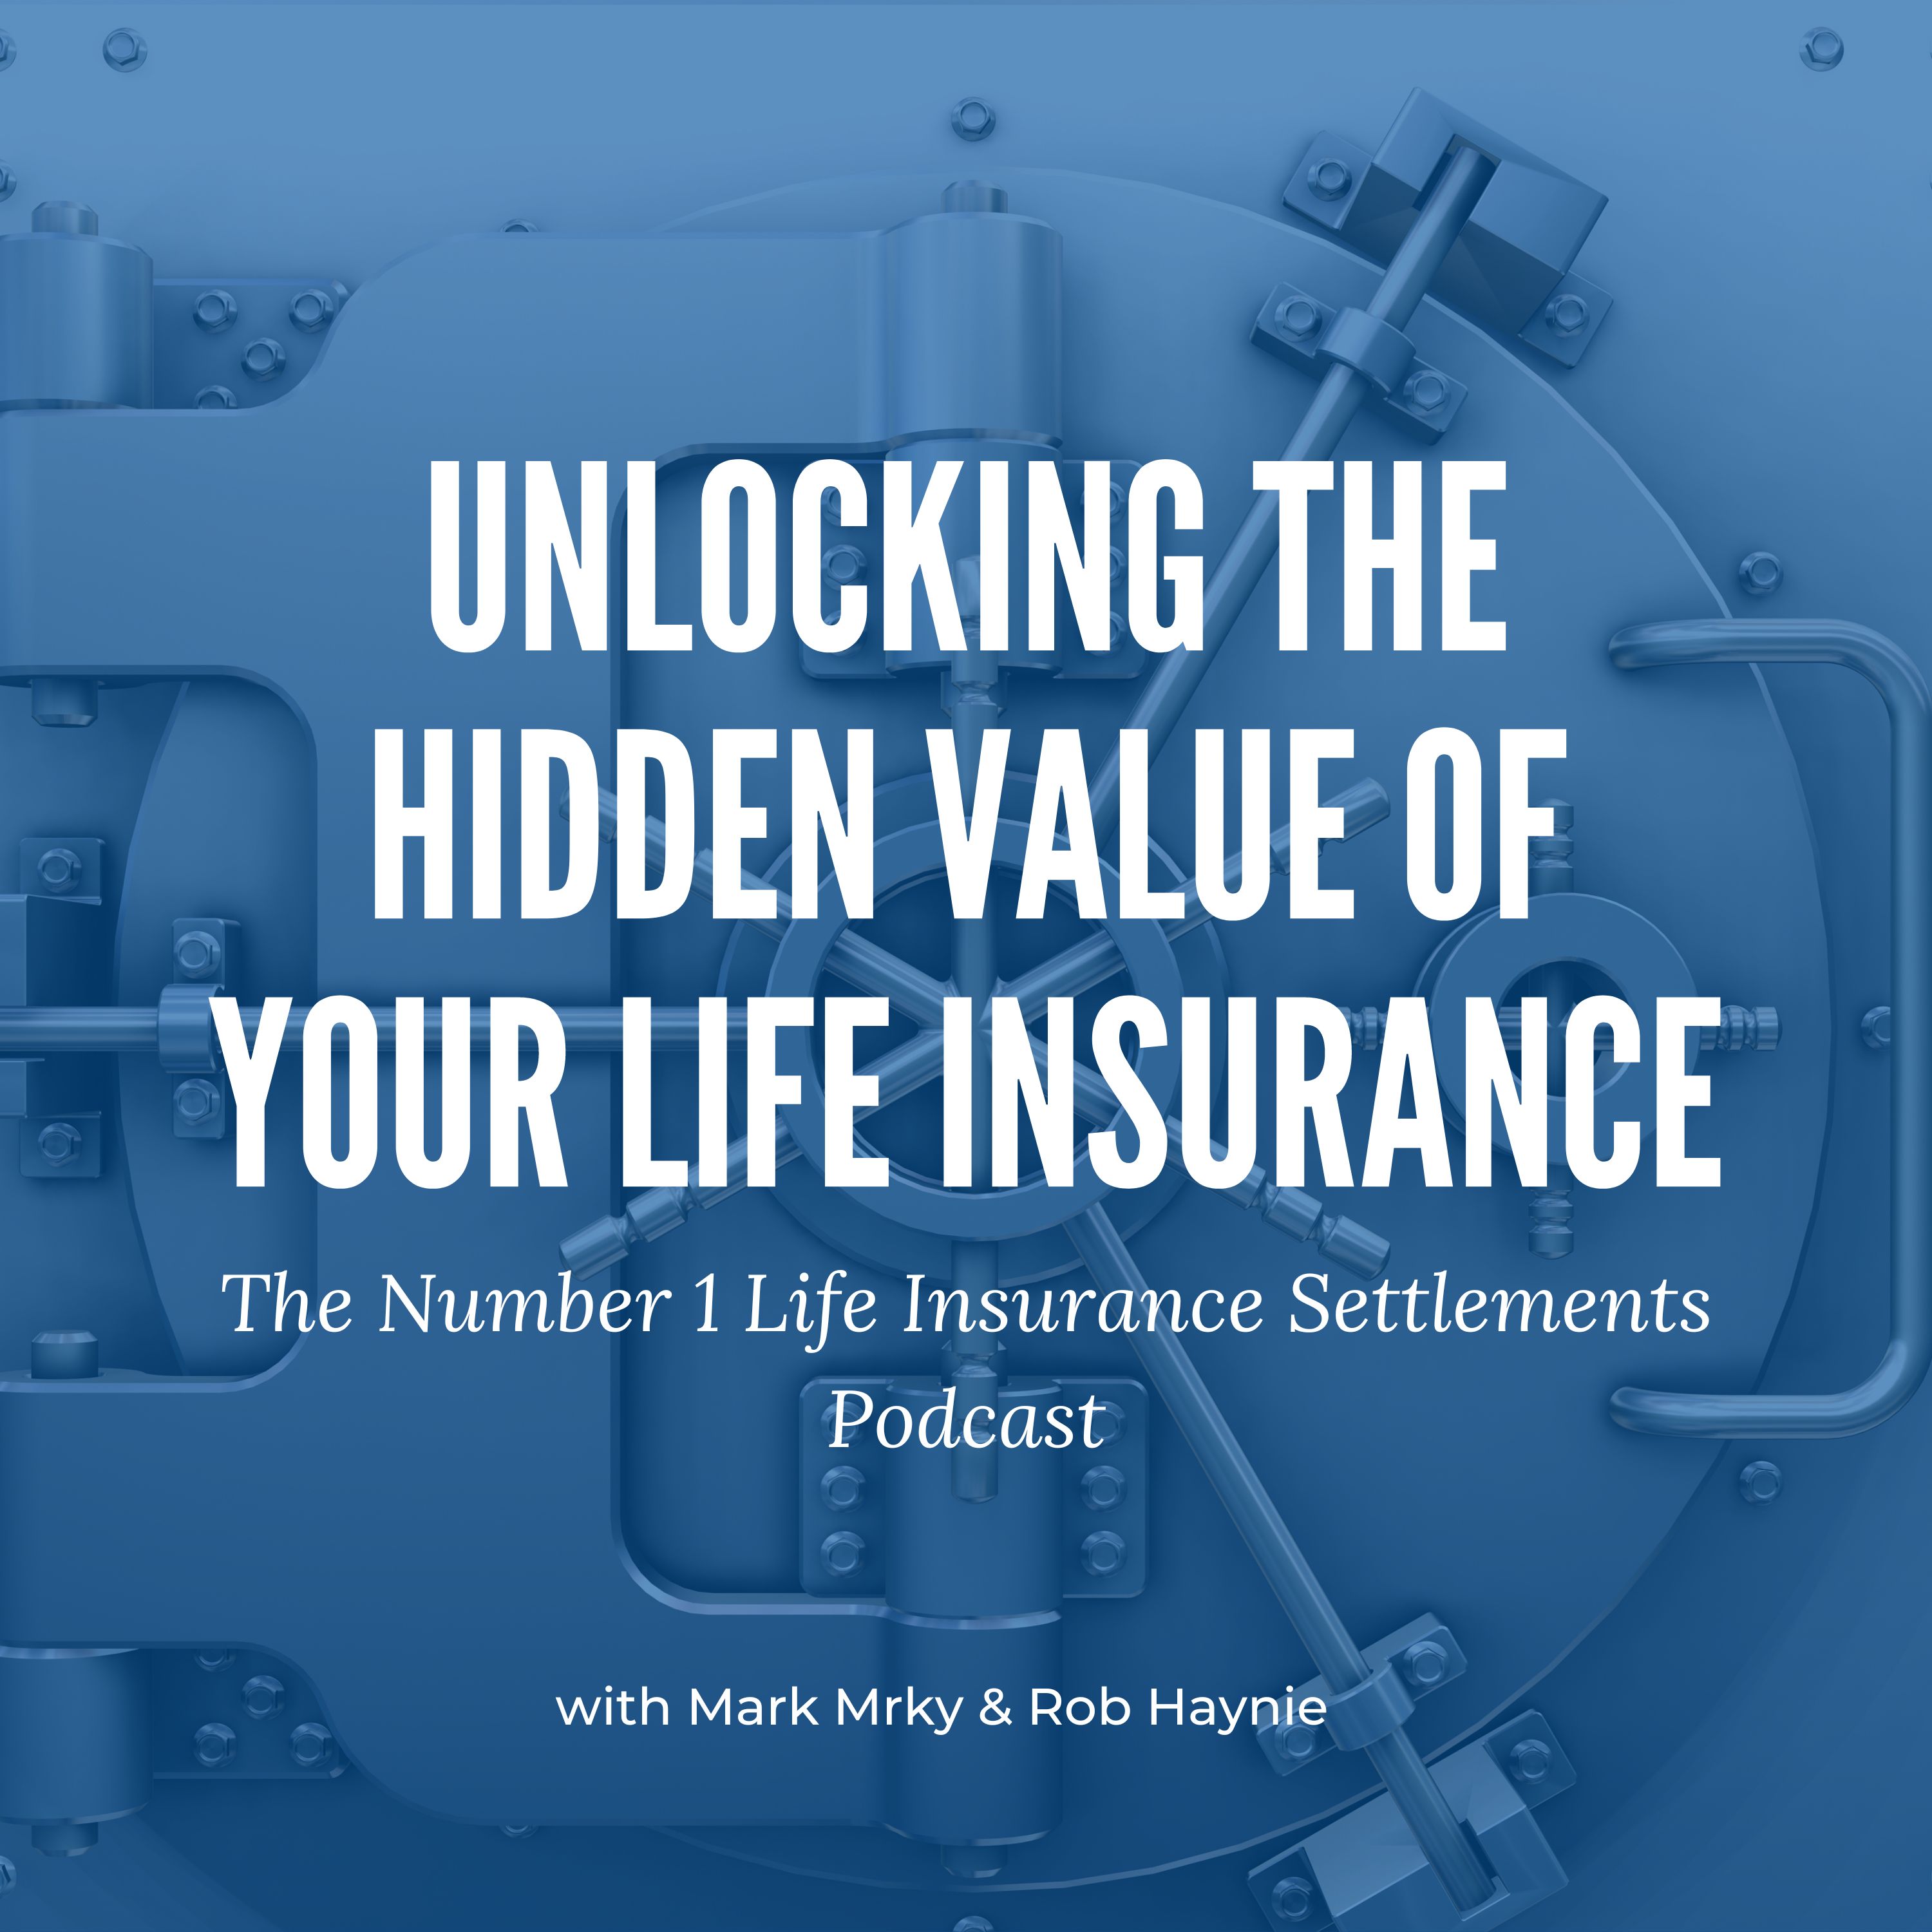 Unlocking the Hidden Value of Your Life Insurance